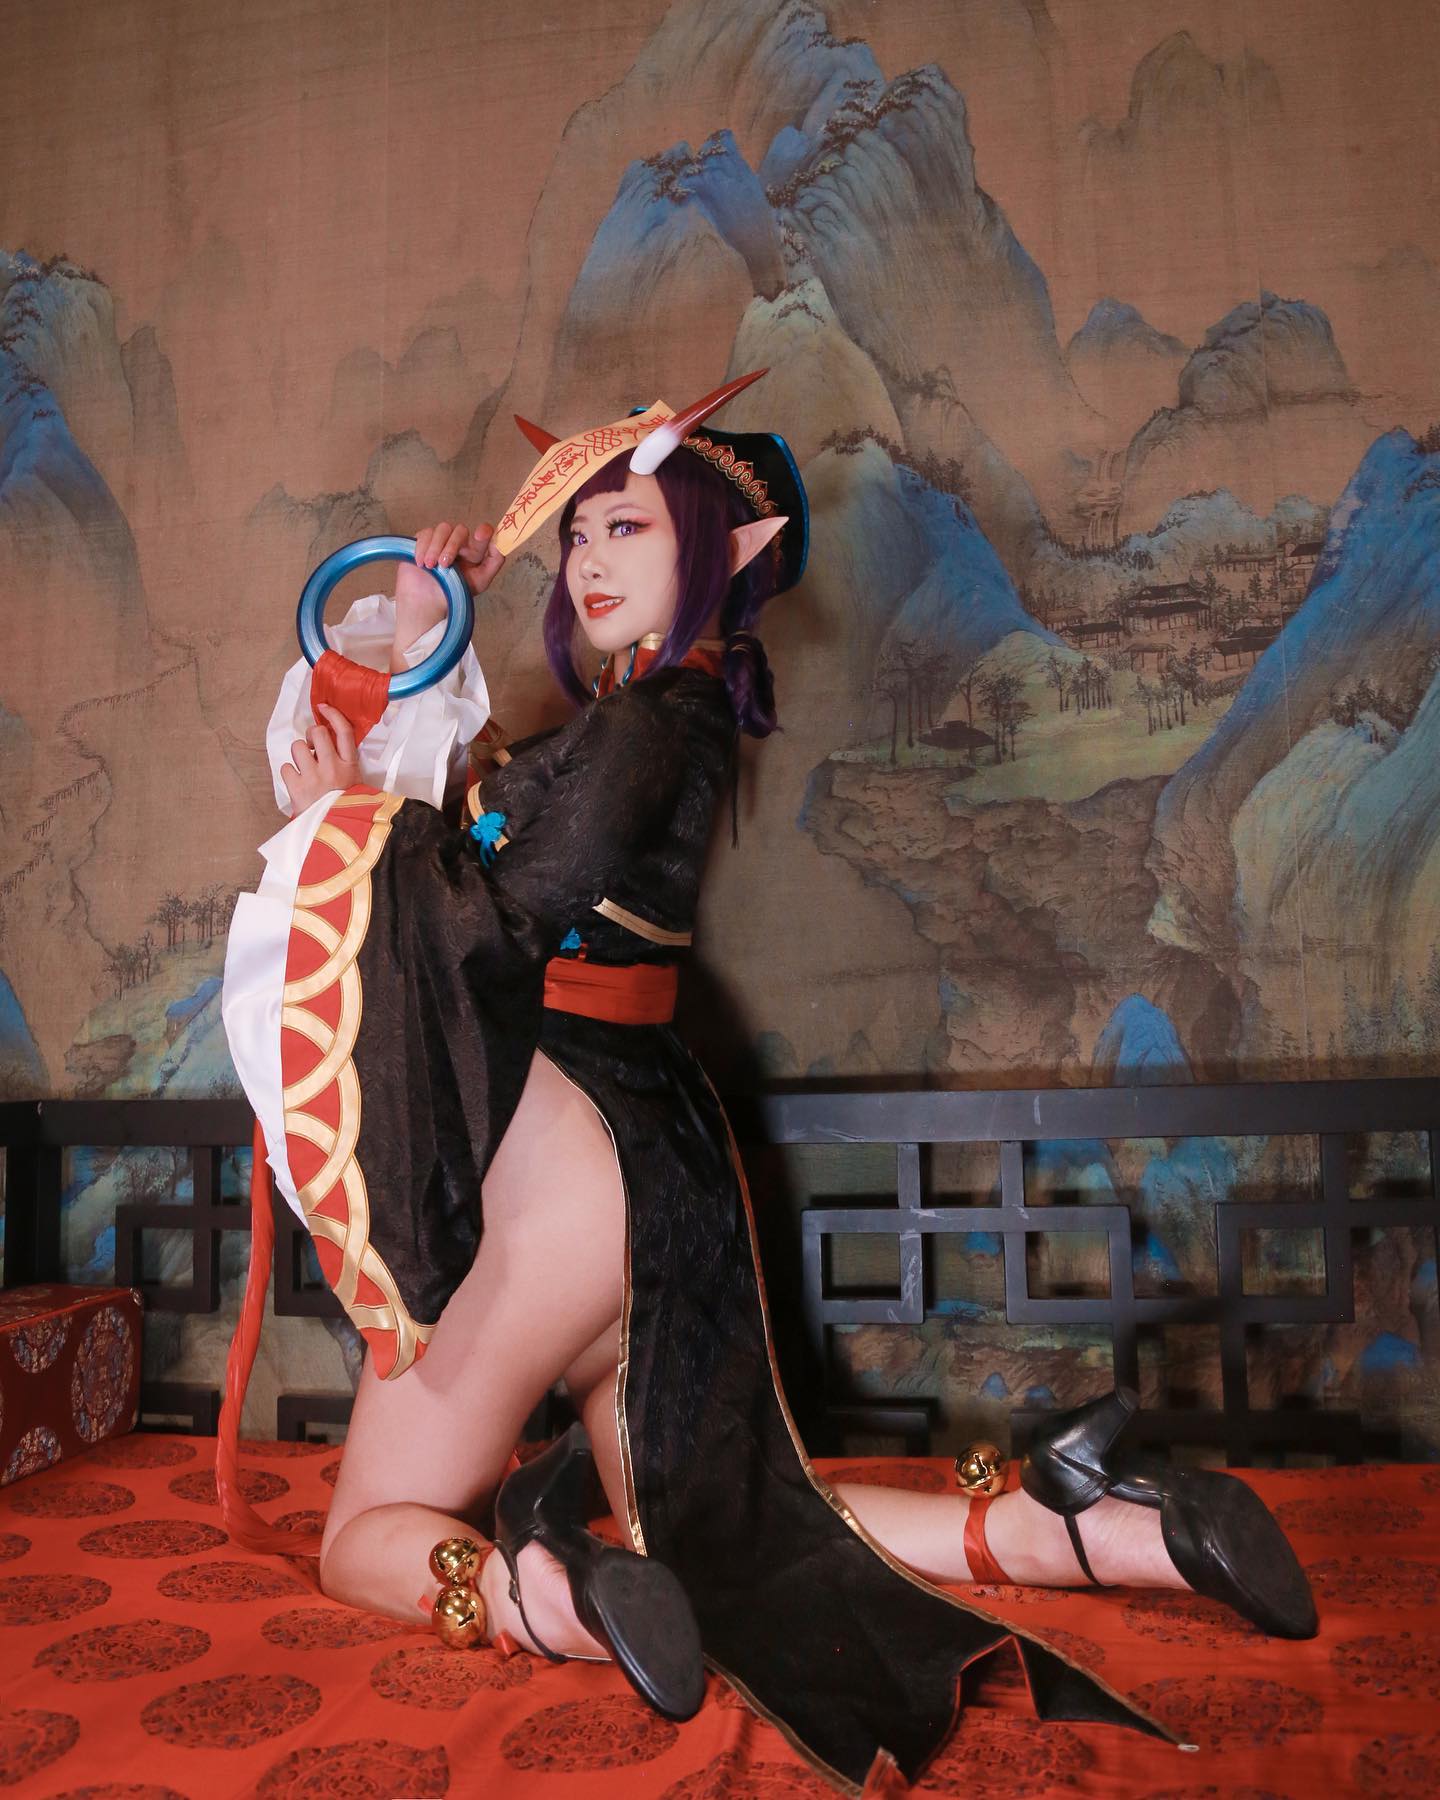 This cosplay is for sale if anyone is interested! 👹 I only wore it for 2 hours (just for this shoot). Need to downsize because I don’t have any more space 😅 My depop @pearlpeony has a ton of cosplay, wigs, and fashion for sale 🎁
👹Character: Shuten Doji (Halloween Jiangshi version) from Fate Grand Order
📍: @mysticpalace_wanxianggong
📸: @langshuw
______________________
#cosplay #shutendouji #shutendoji #shutendoujicosplay #jiangshi #halloween #cosplayersofinstagram #cosplayer #cos #coser #コスプレ #คอสเพลย์ #코스프레 #角色扮演 #cosplaymodel #cosplayphotography #cosplayphotoshoot #asiancosplayer #nyccosplay #fate #fgo #fategrandorder #fatecosplay #kawaii #anime #fgocosplay #chinesemythology #monstergirl #demongirl #kumikunai